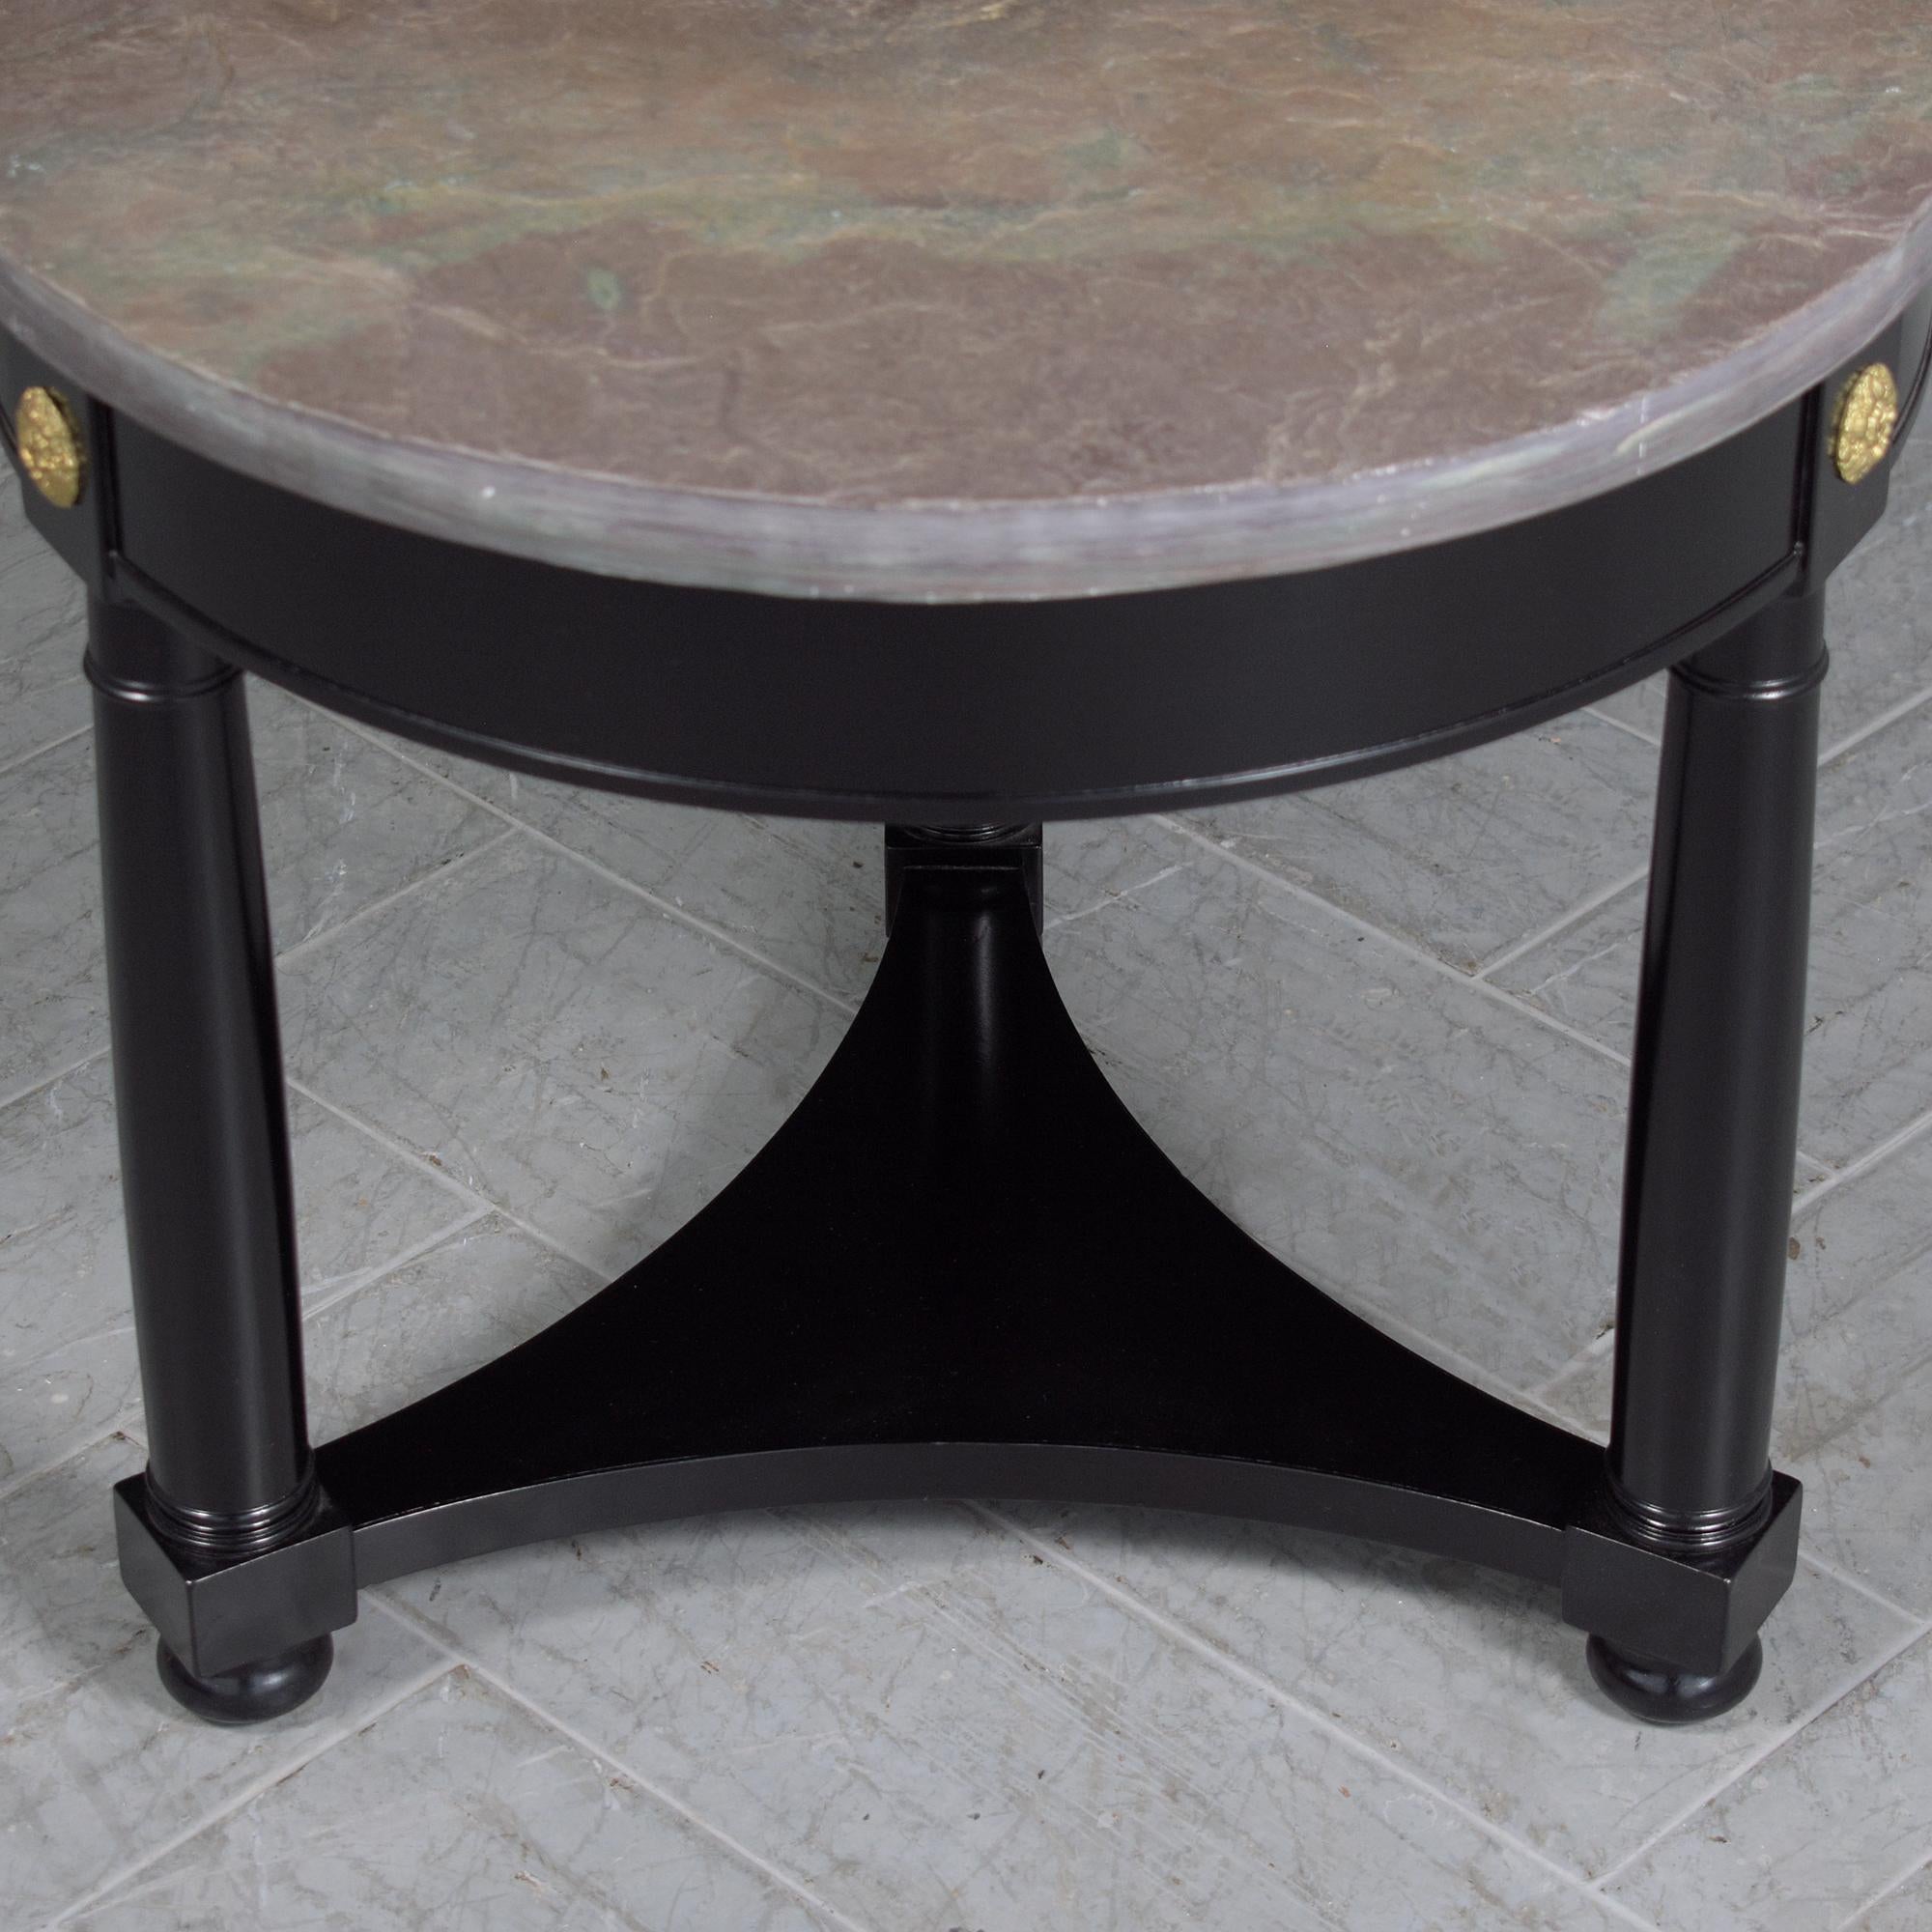 Restored Vintage Regency-Style Round Side Table with Grey Marble Top For Sale 1